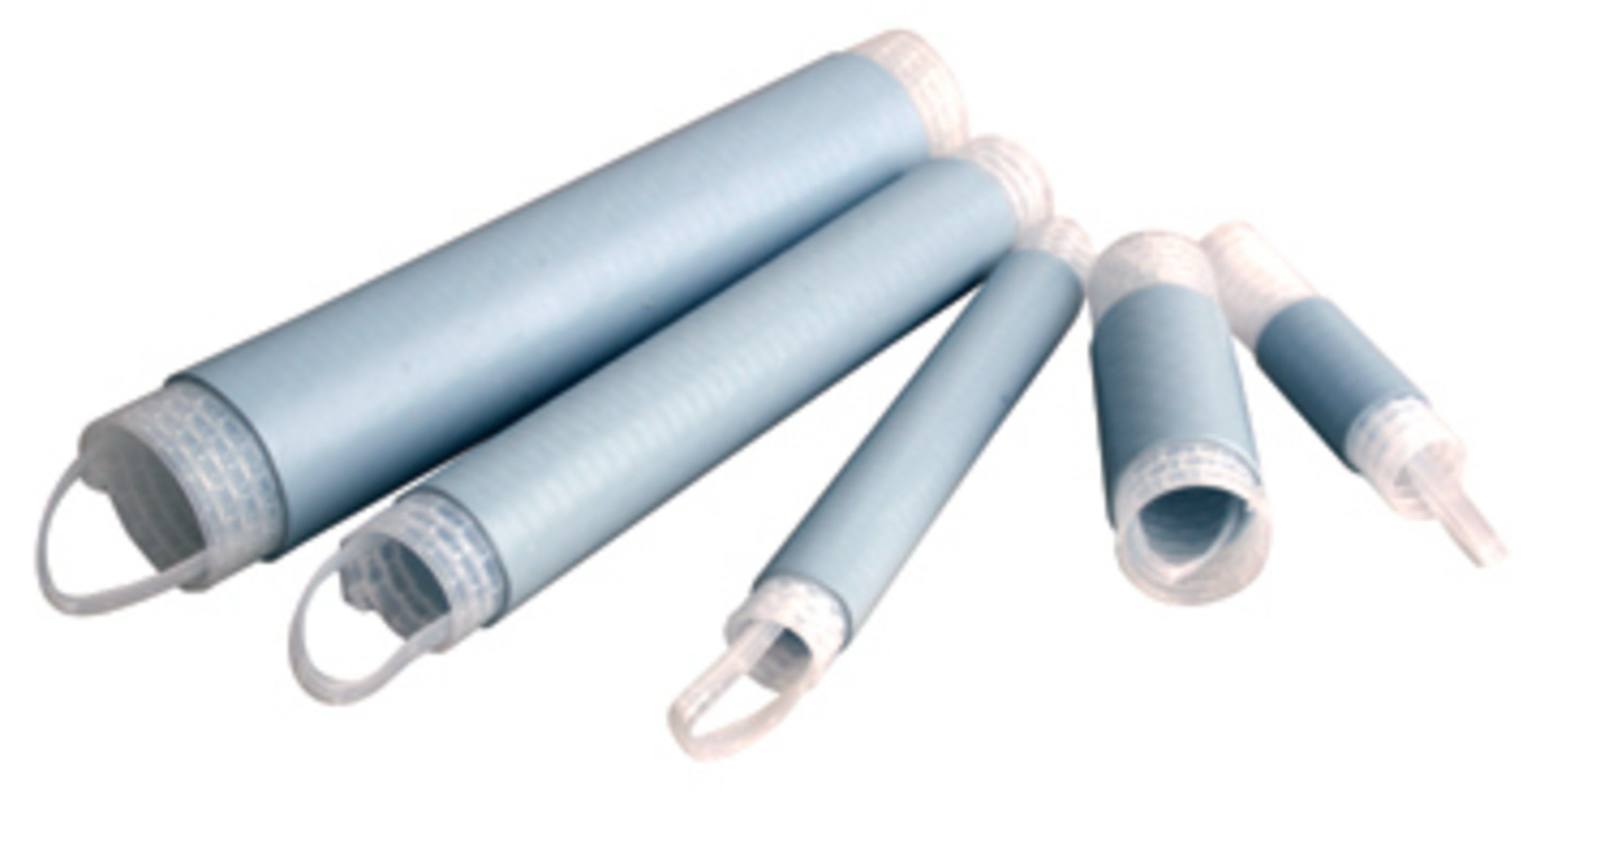 3M 8445.75 Cold-shrink tubing, silicone, light gray, 18.4/10.7 mm, 179 mm